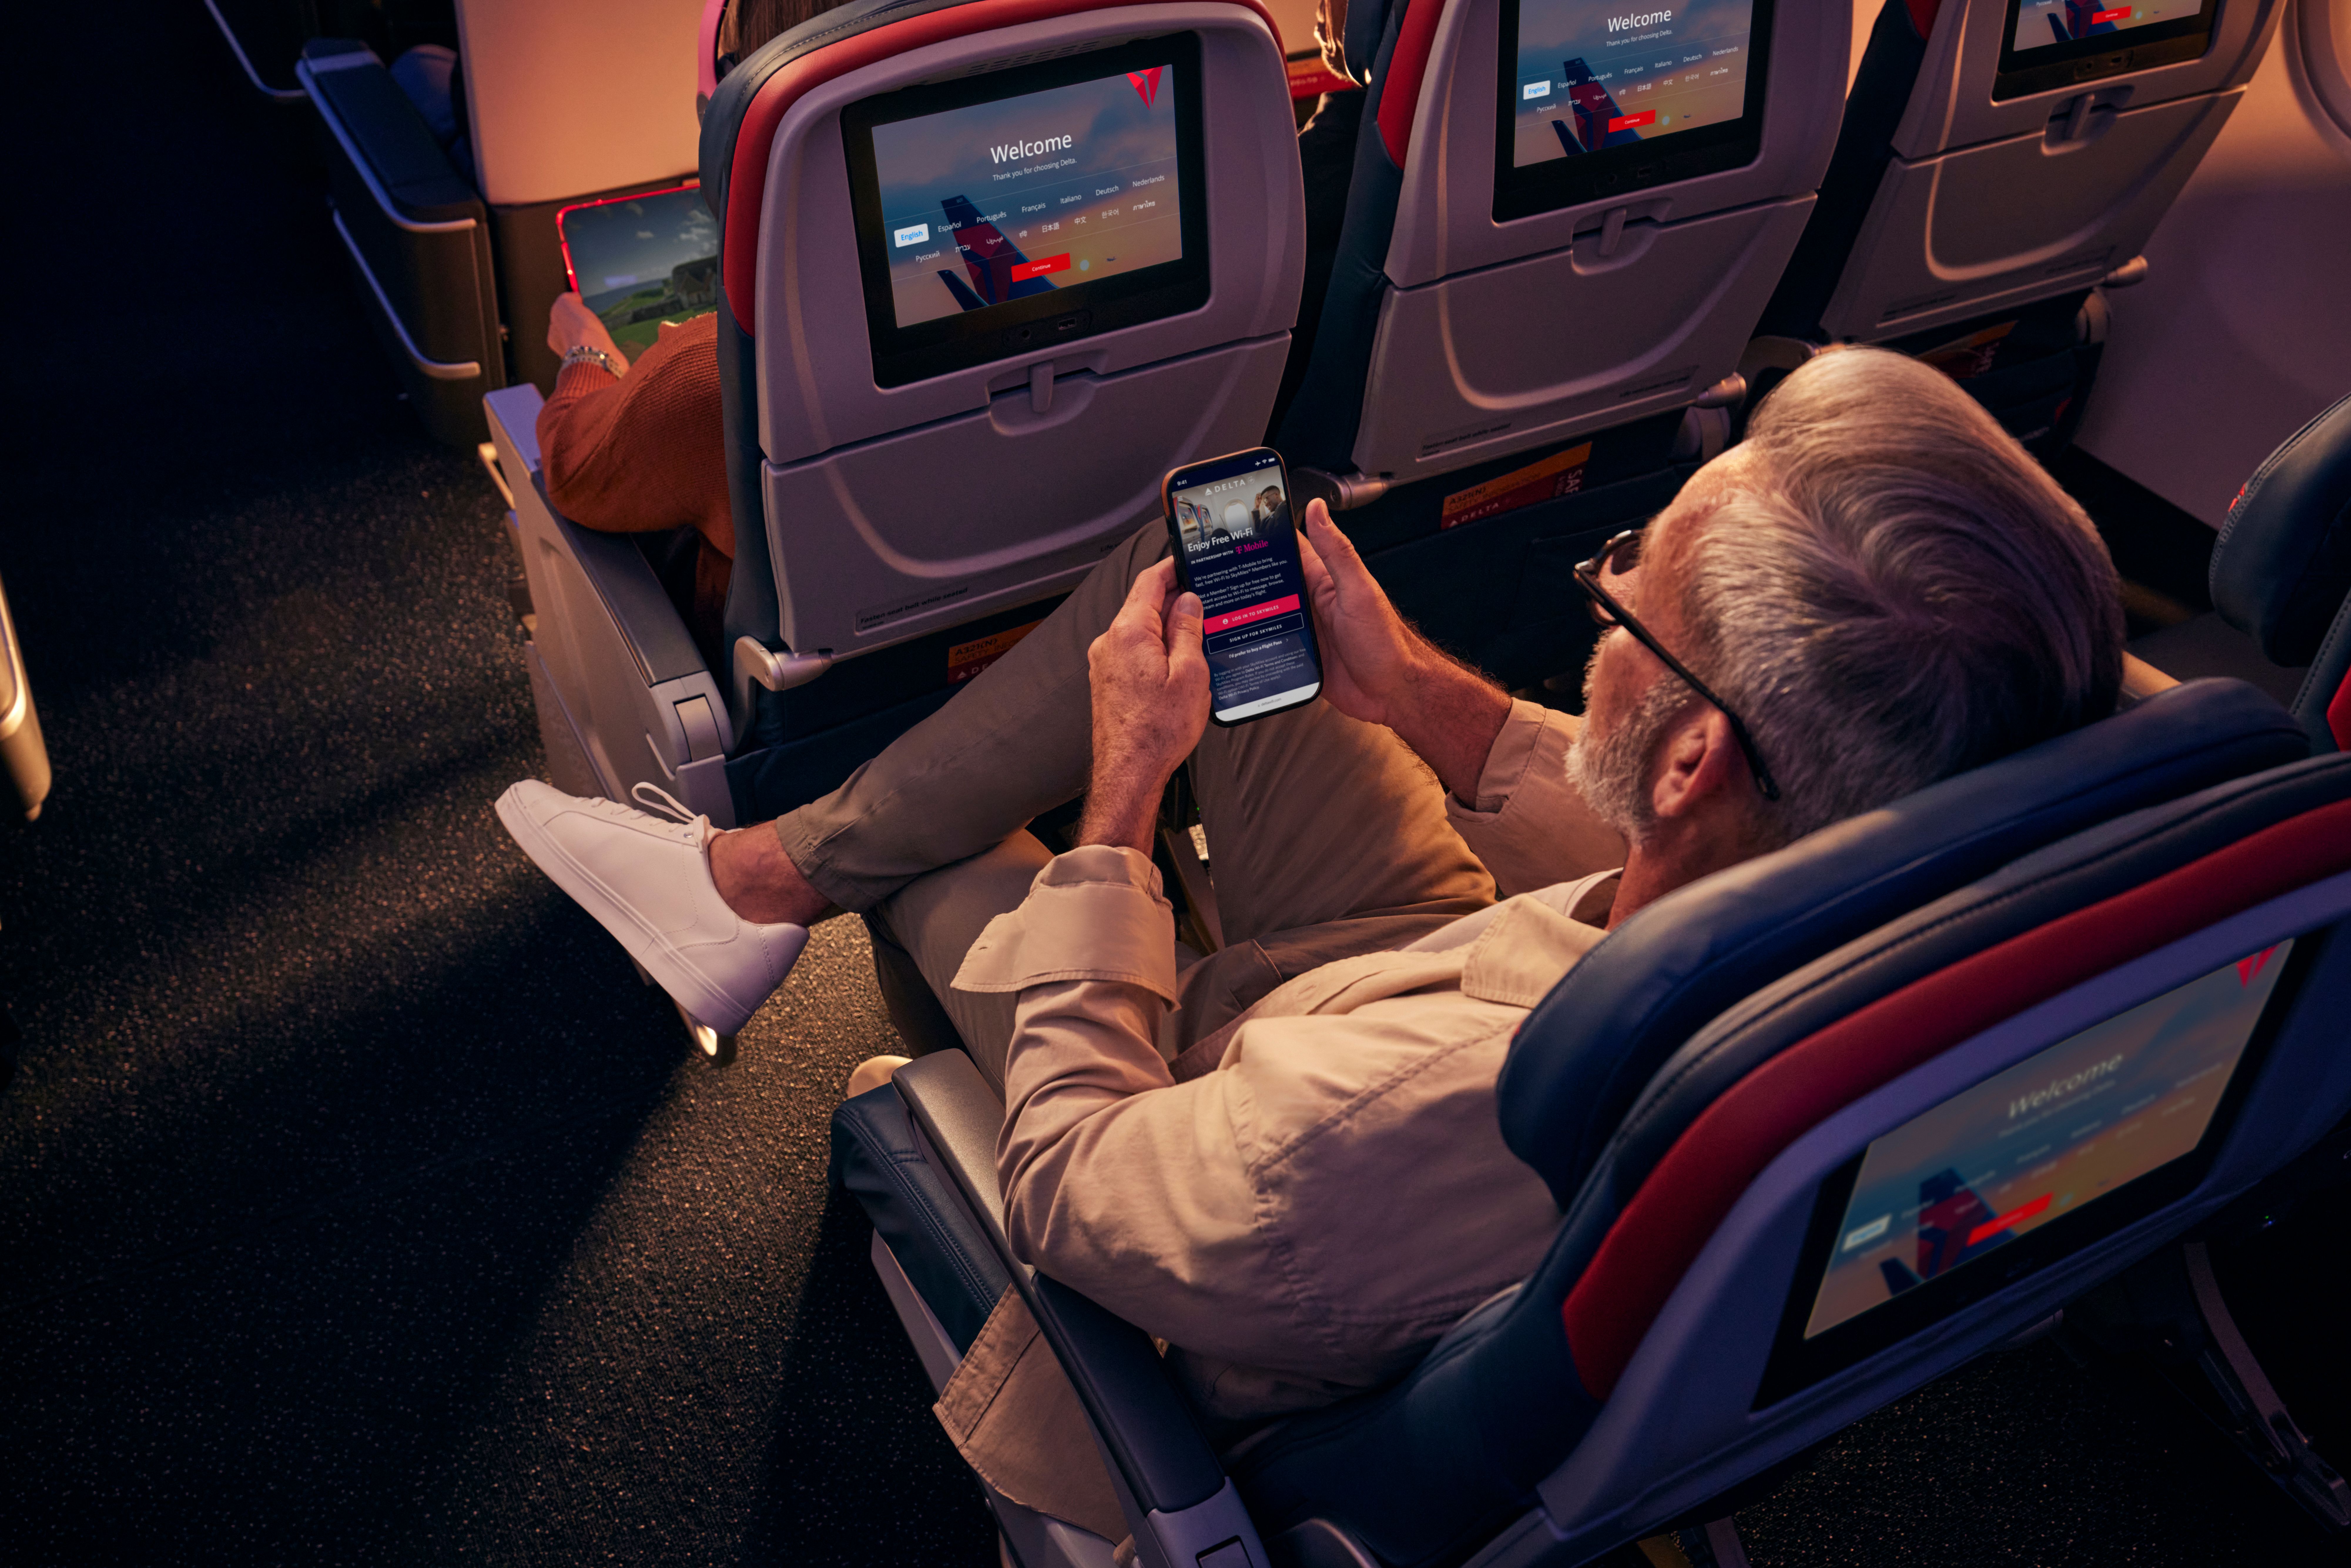 A Delta Air Lines passenger using their mobile phone in flight.